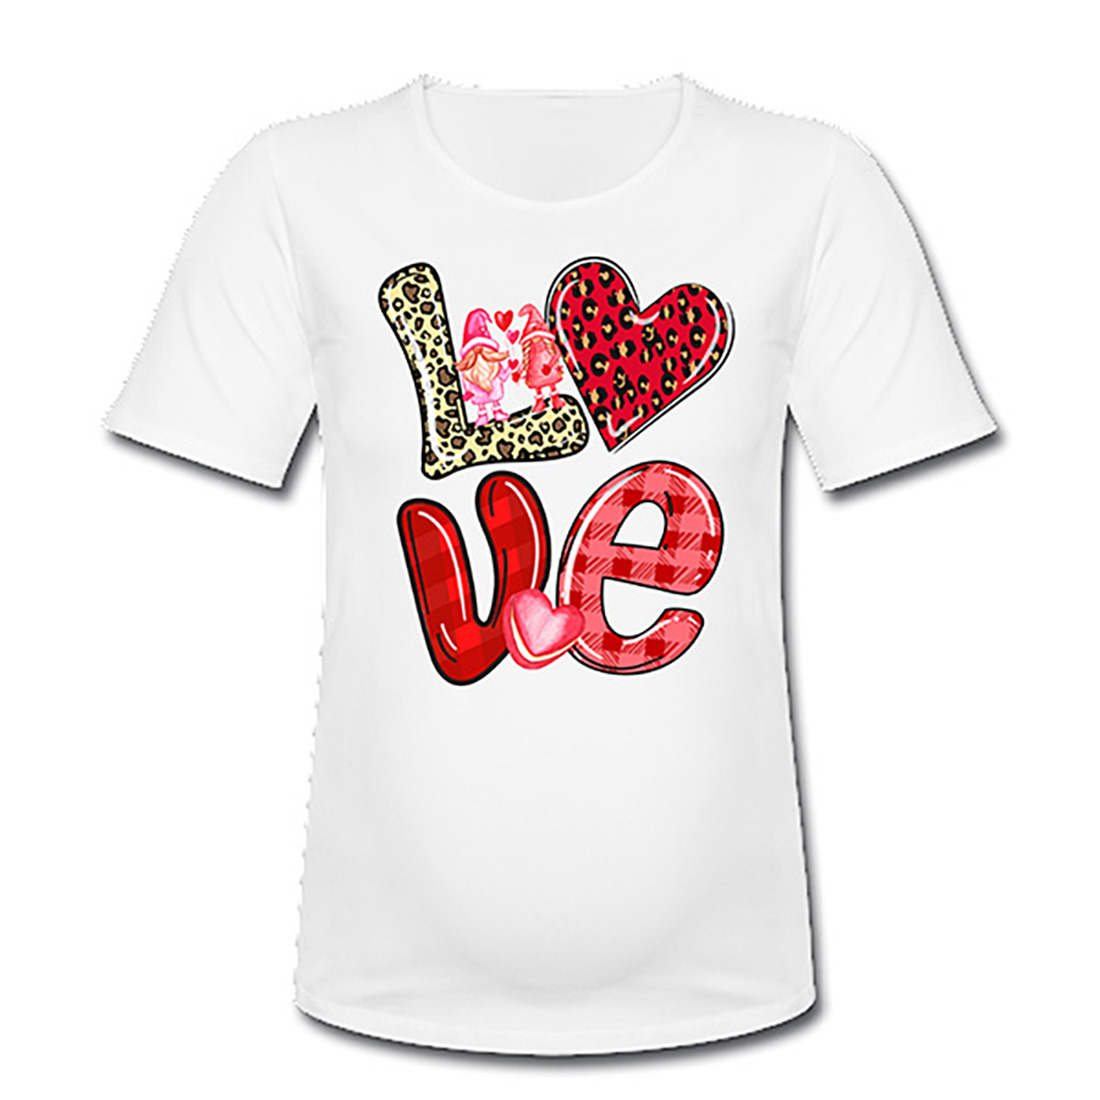 Love Sublimation for Valentine, Love Illustration for T-Shirt and Print Items cover image.